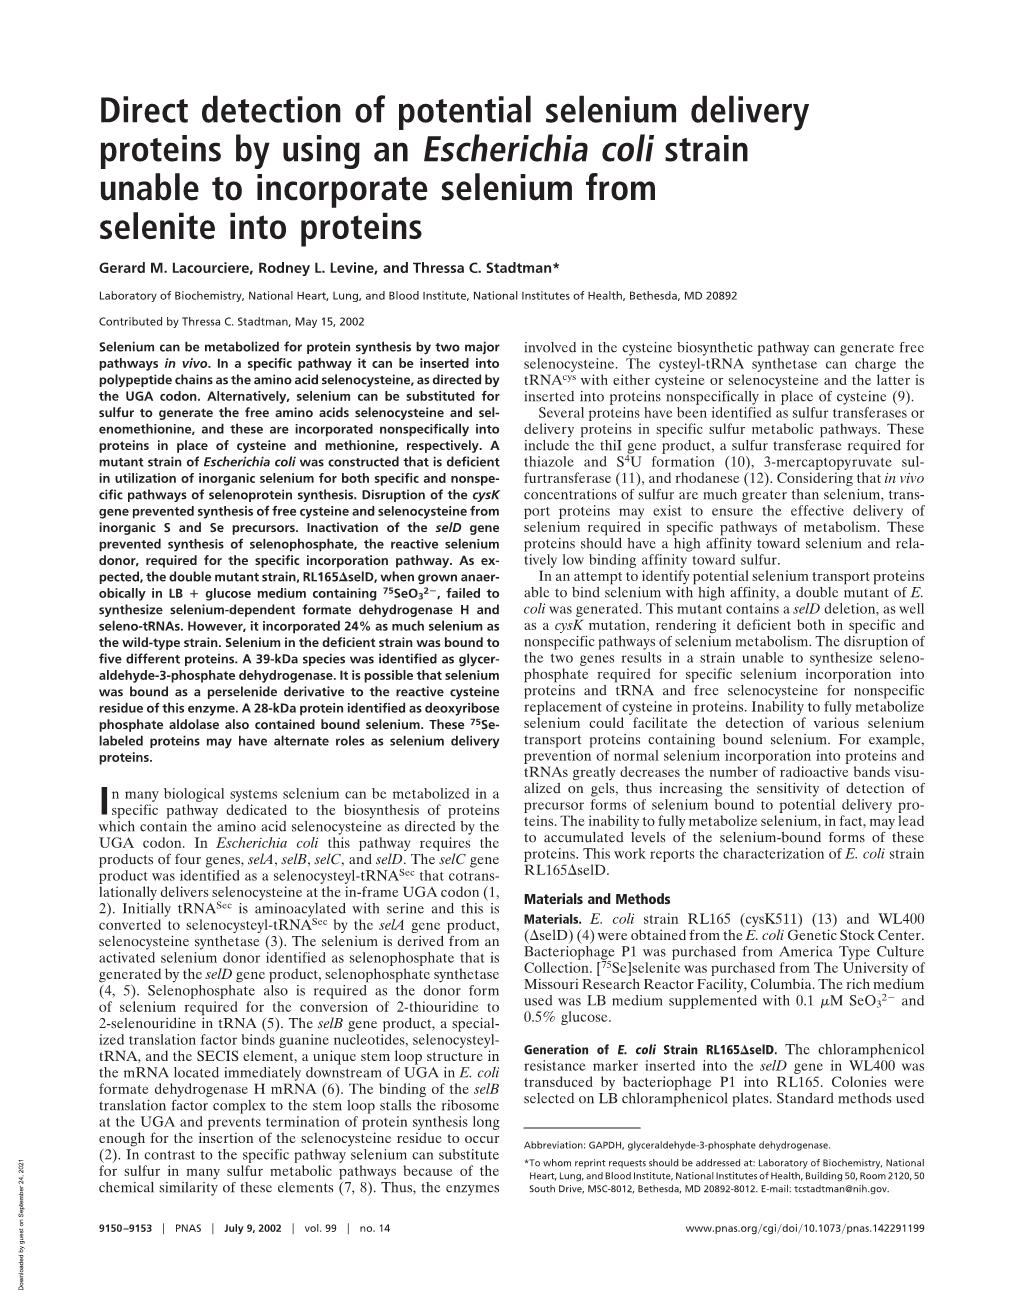 Direct Detection of Potential Selenium Delivery Proteins by Using an Escherichia Coli Strain Unable to Incorporate Selenium from Selenite Into Proteins